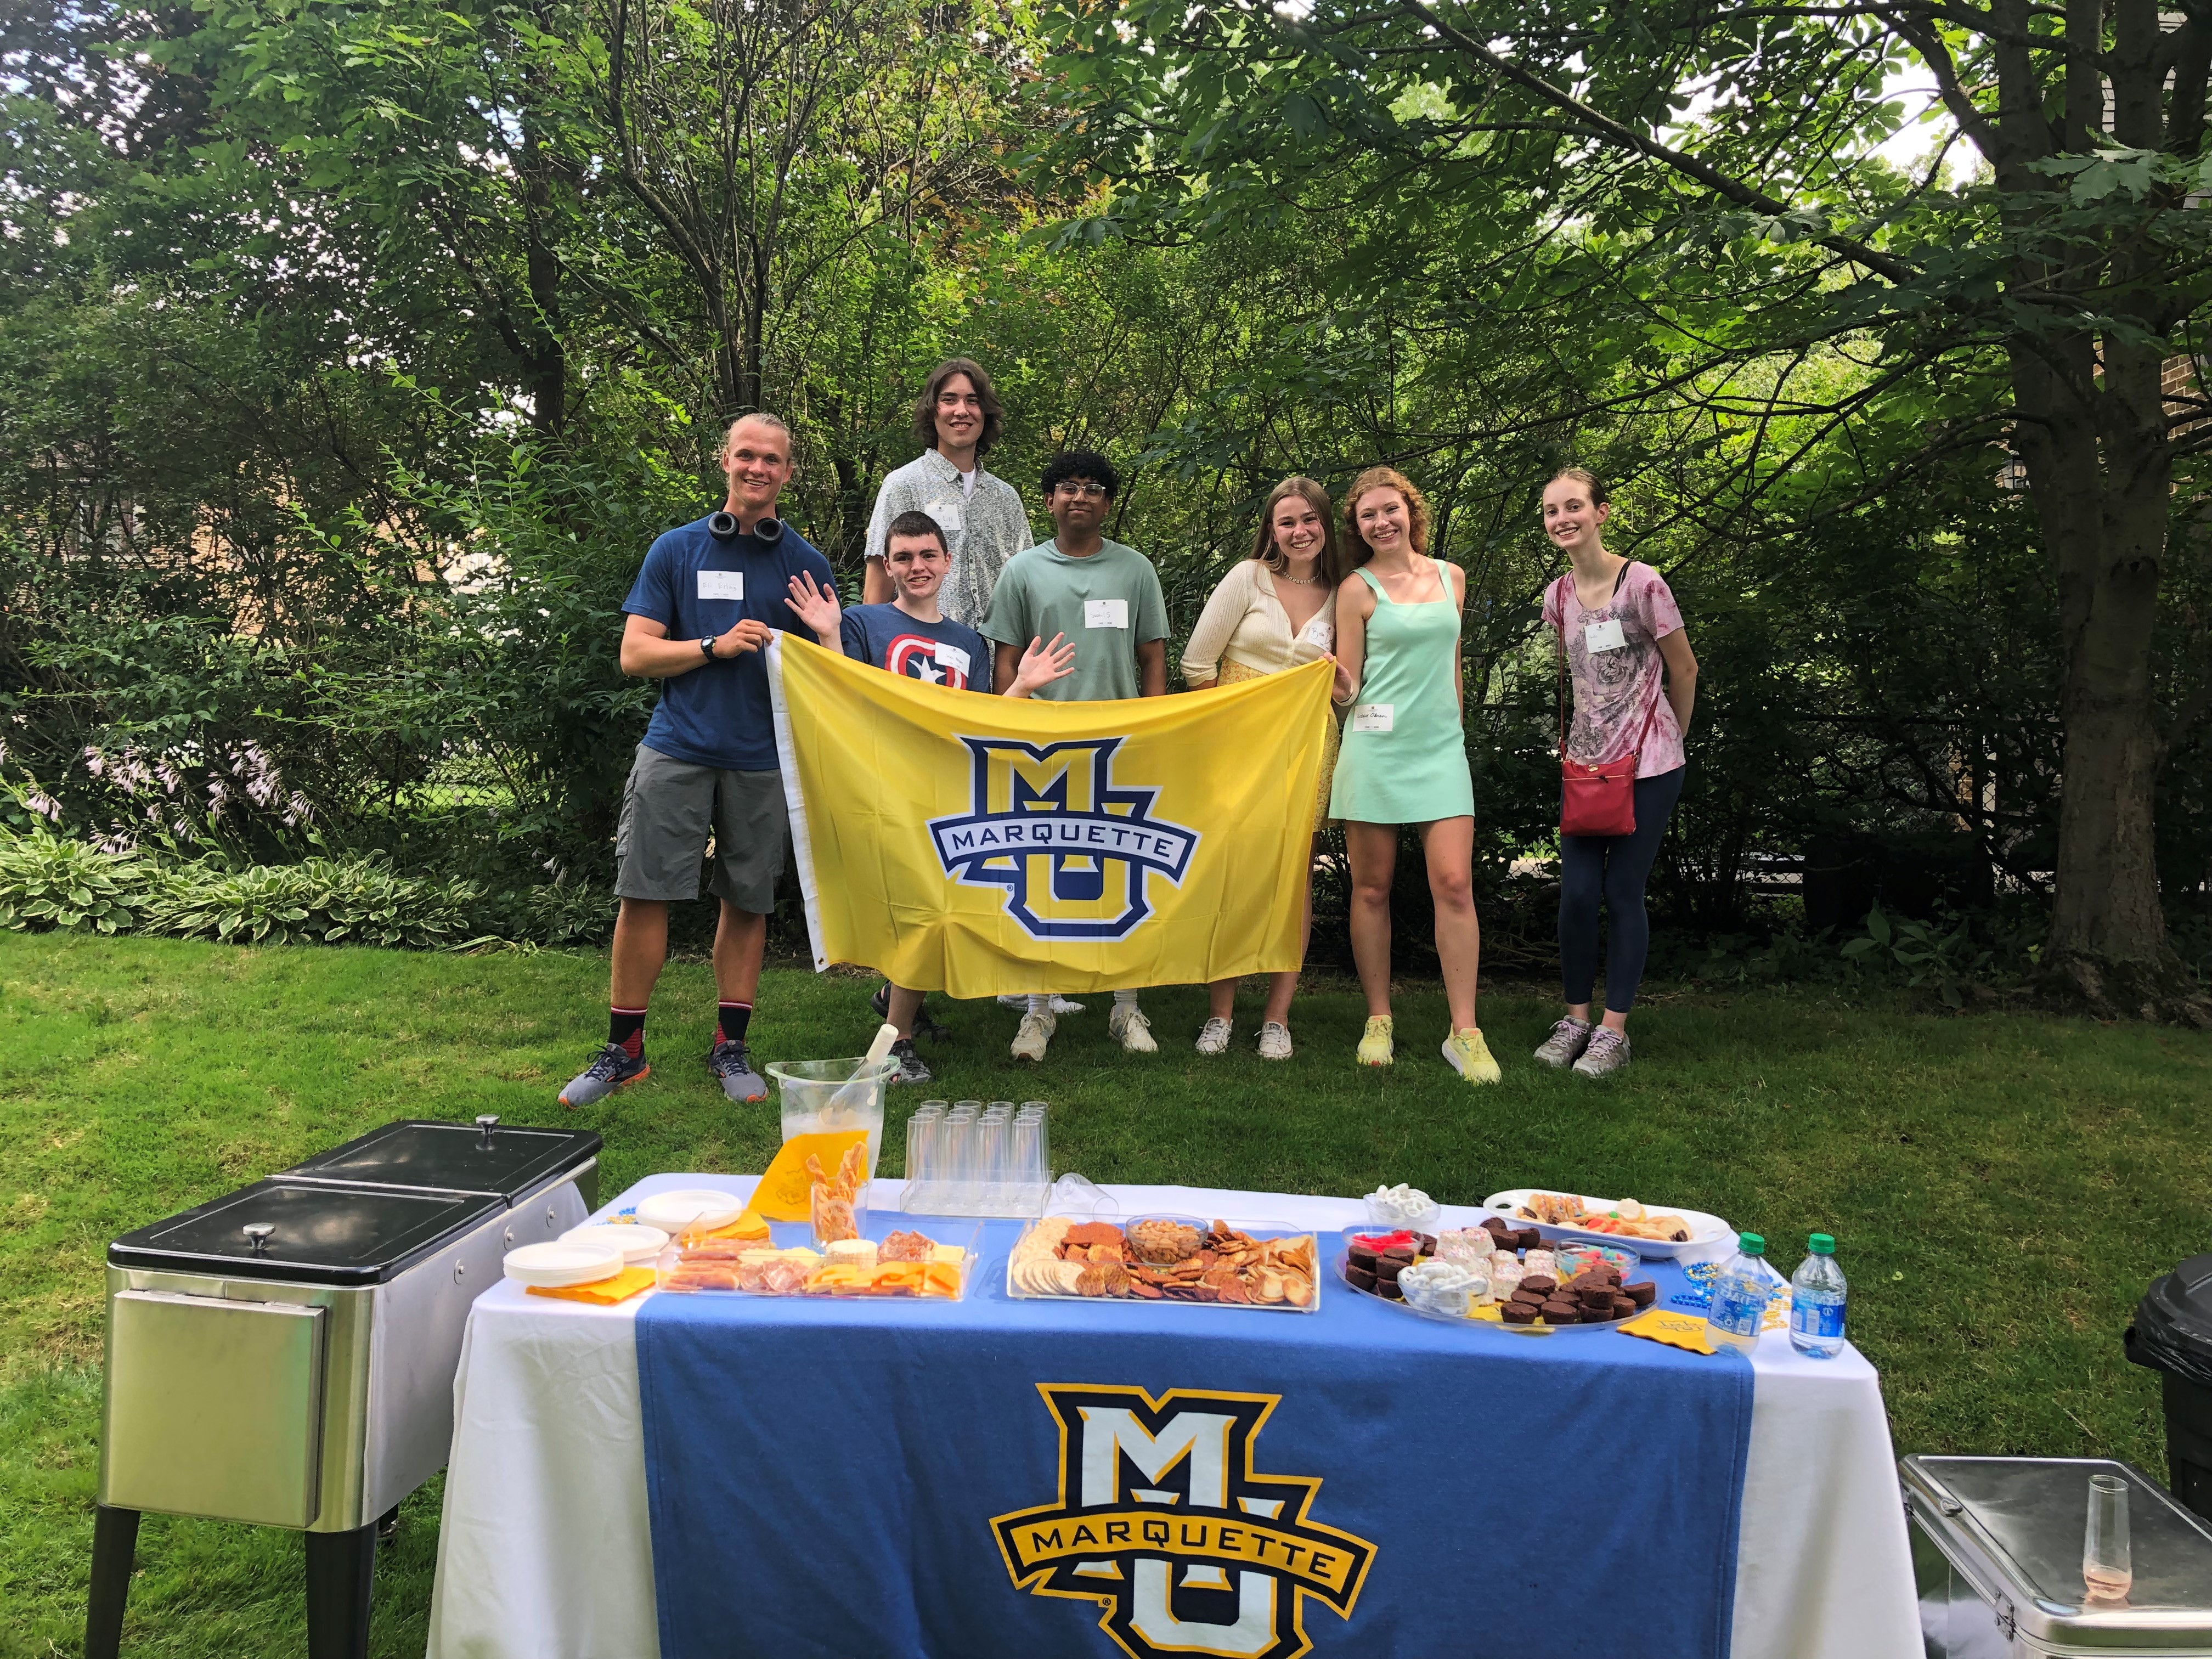 Students holding Marquette flag in backyard